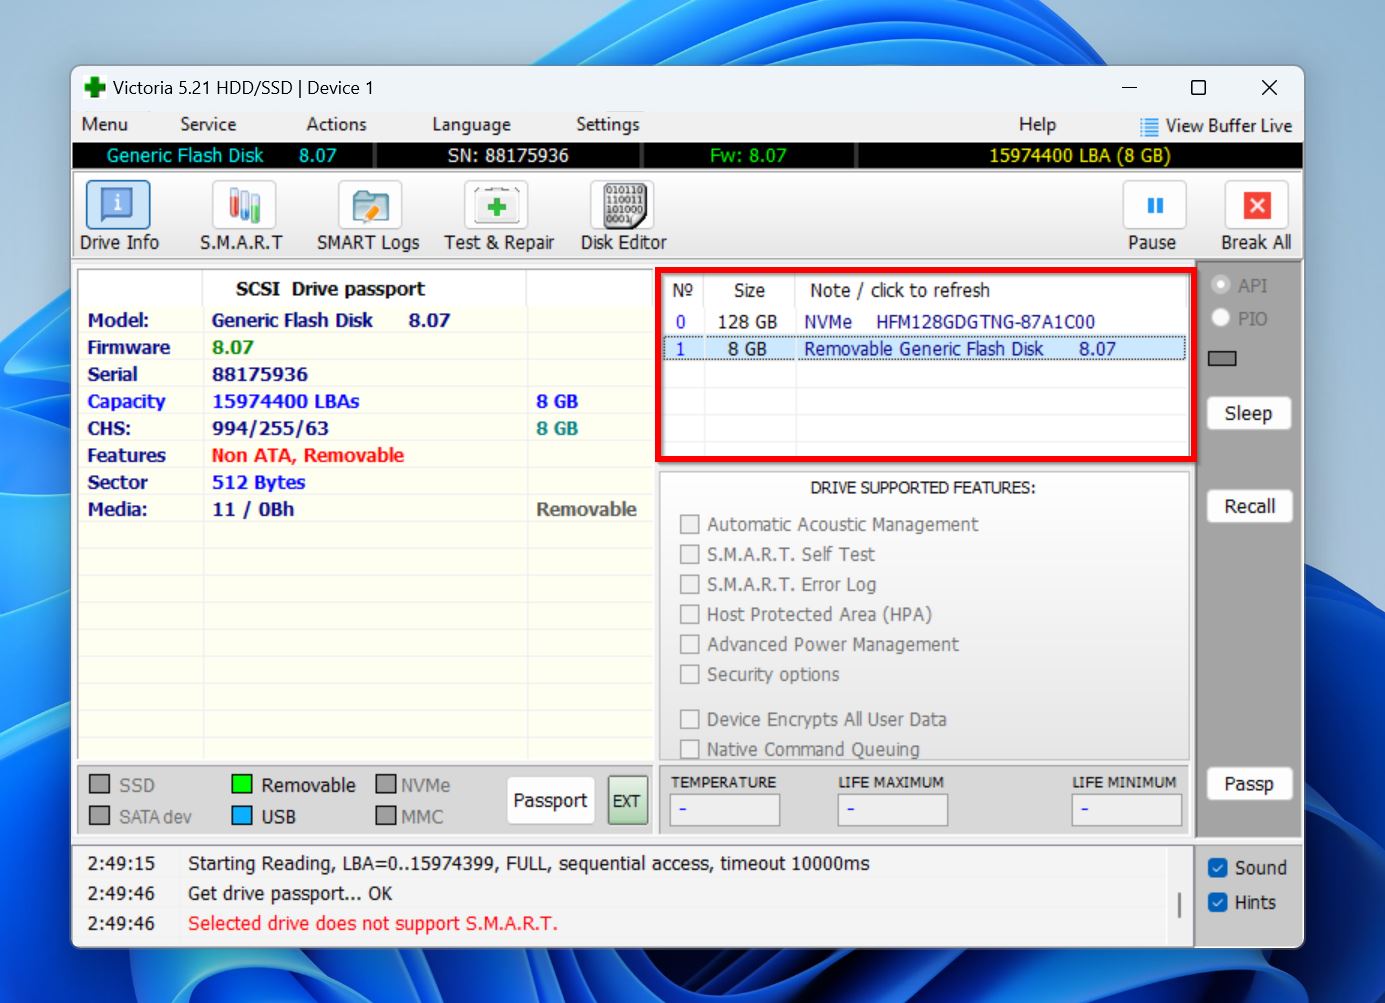 Select drive option in Victoria HDD/SSD.